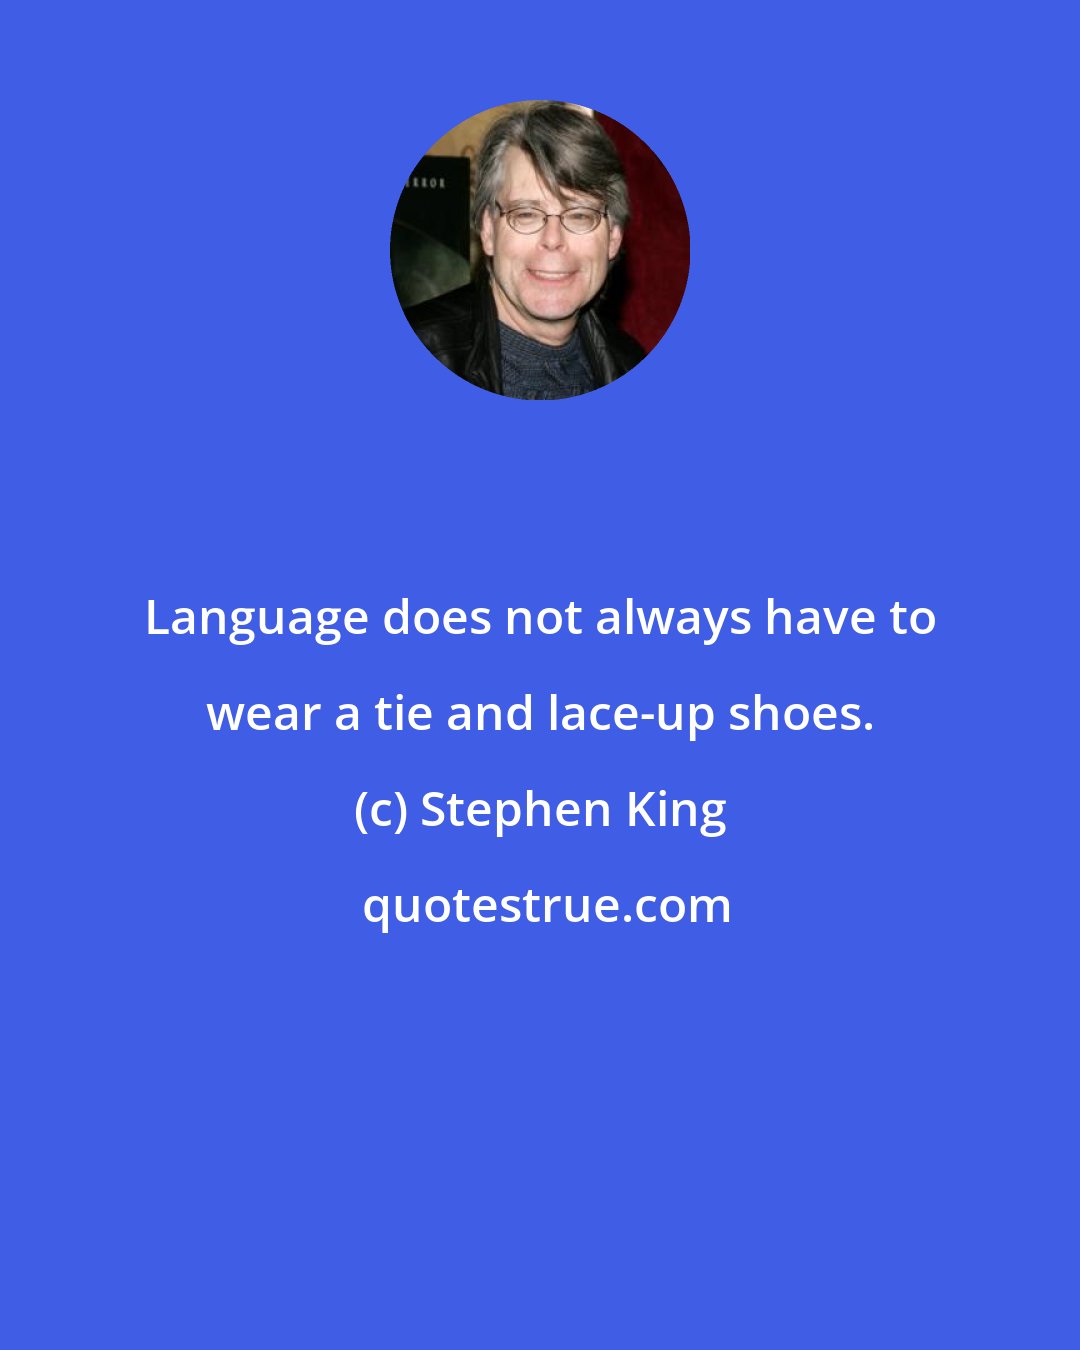 Stephen King: Language does not always have to wear a tie and lace-up shoes.